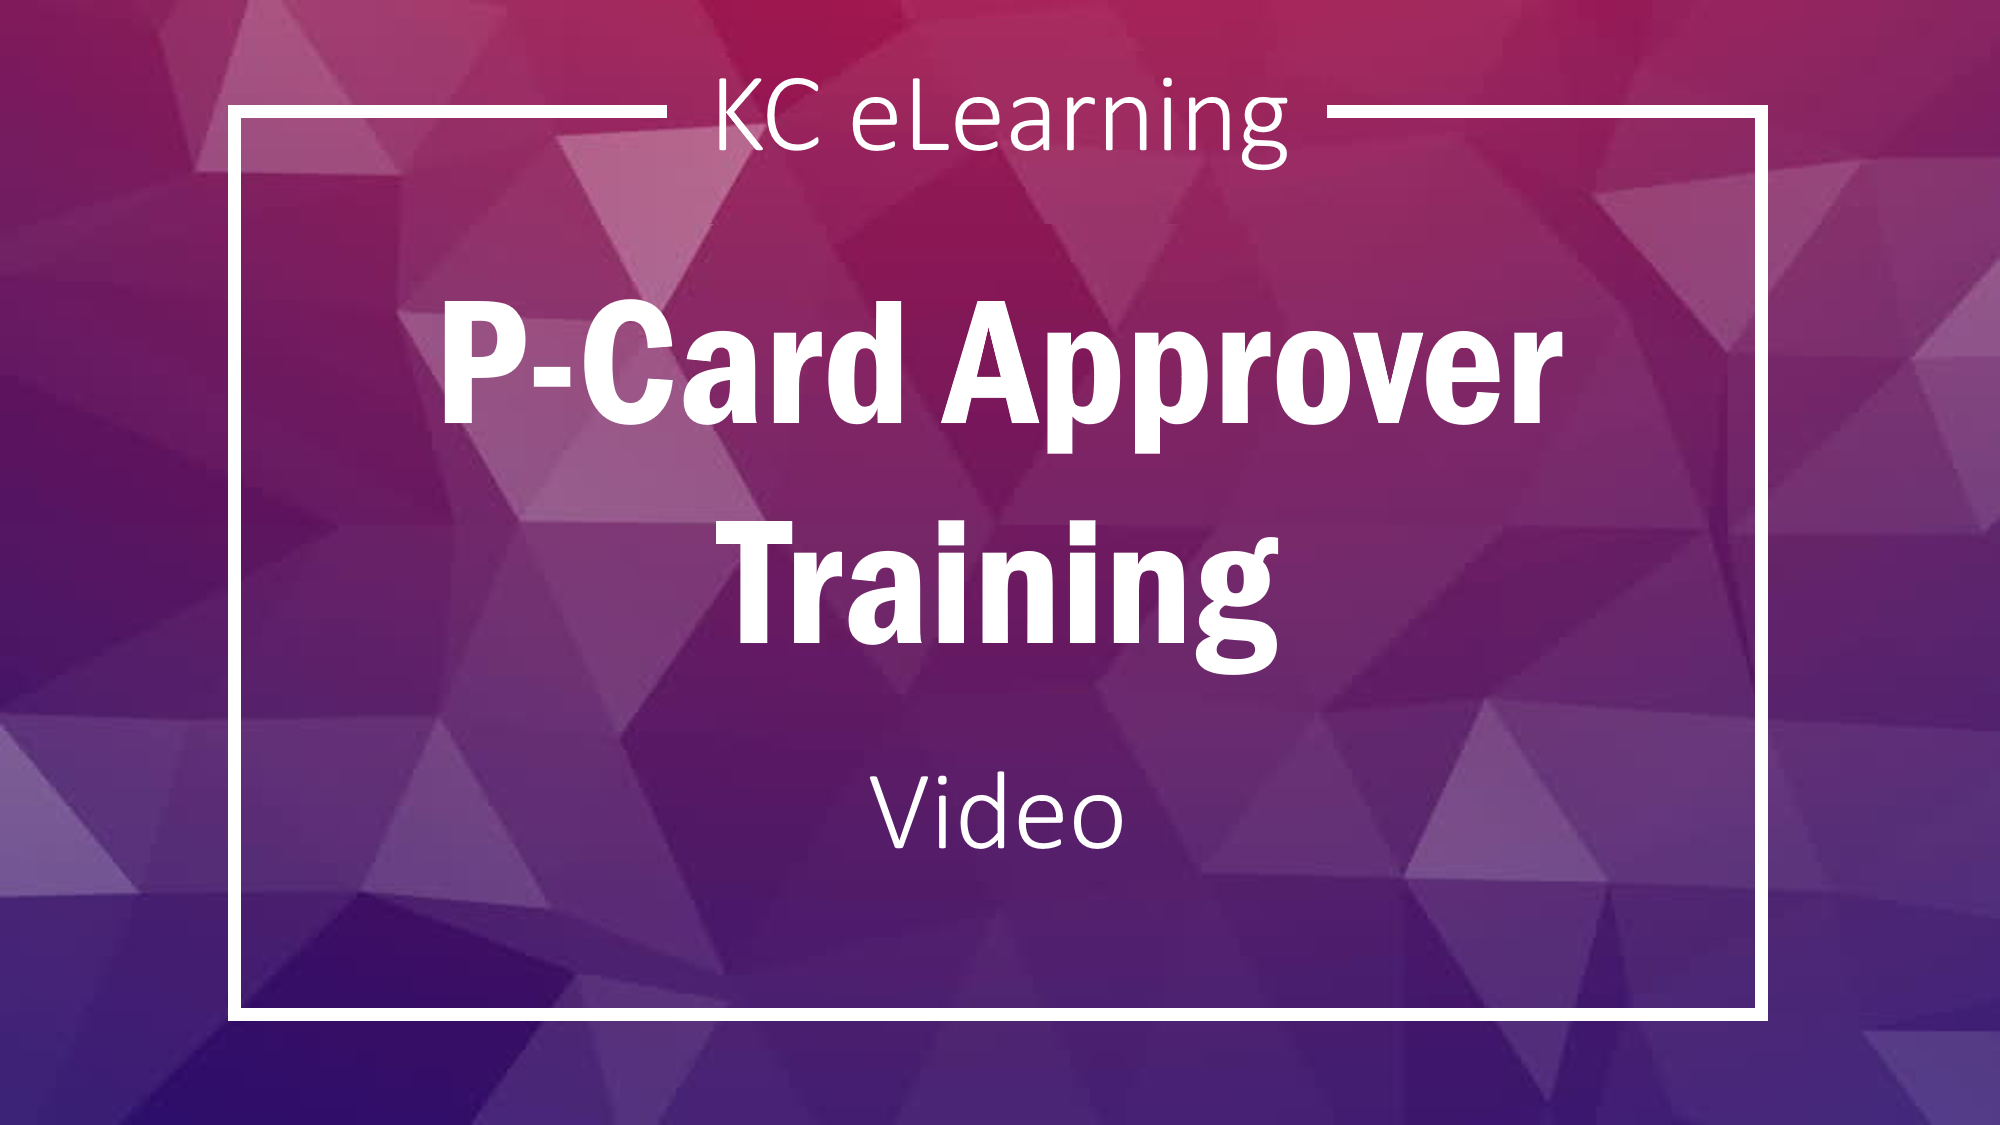 P-Card Approver Training